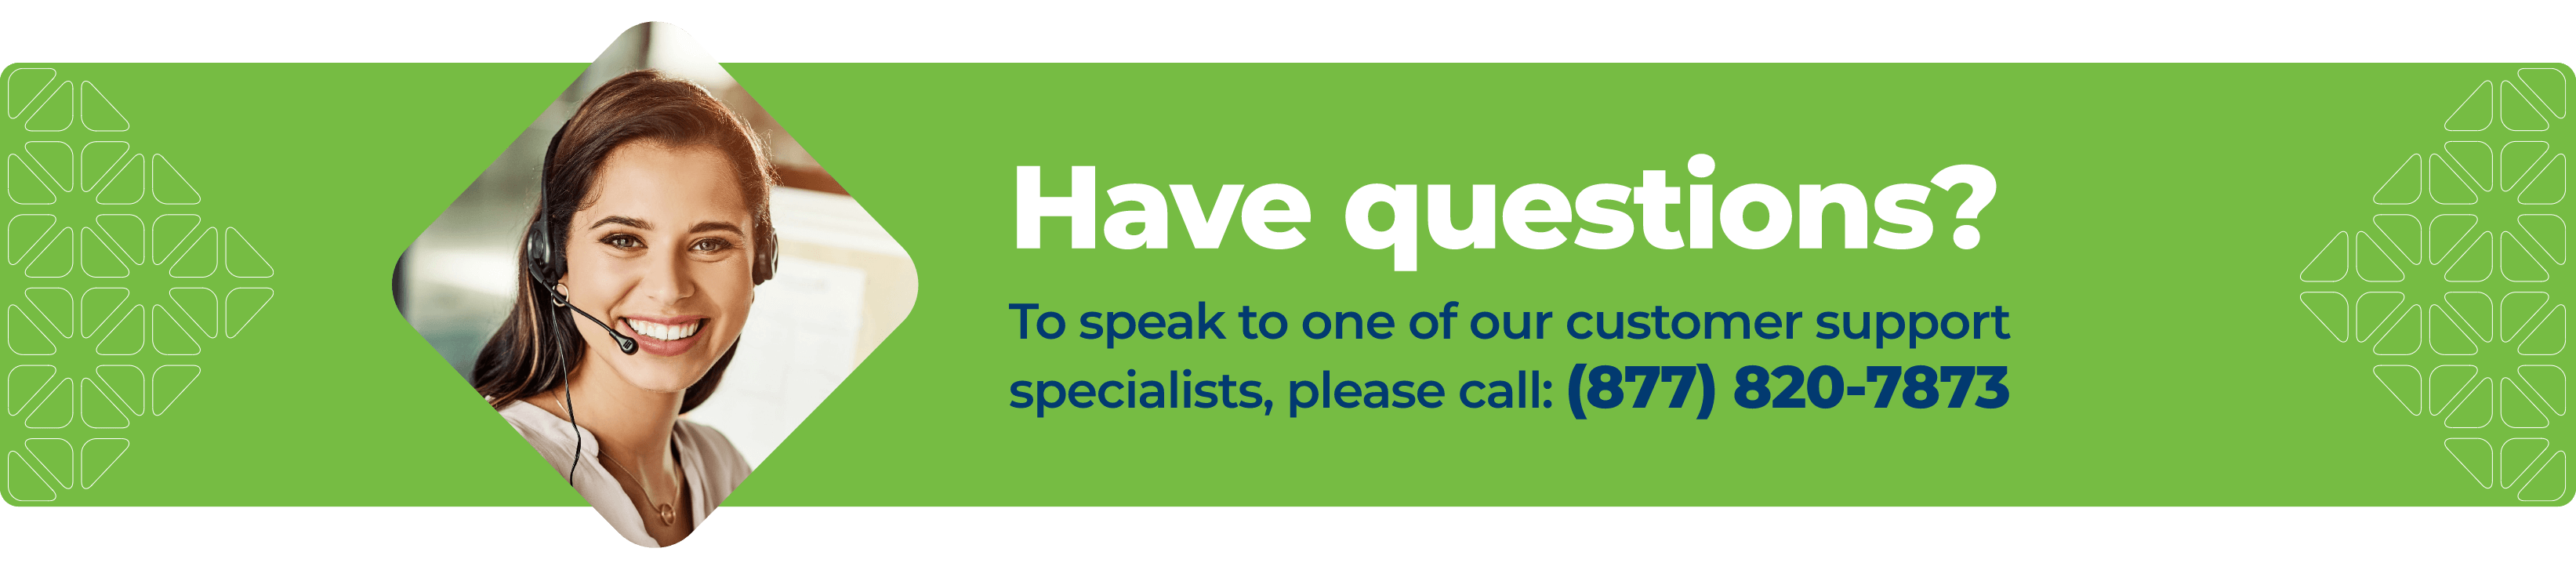 Have questions? To speak to one of our custom support specialists, please call: (877) 820-7873